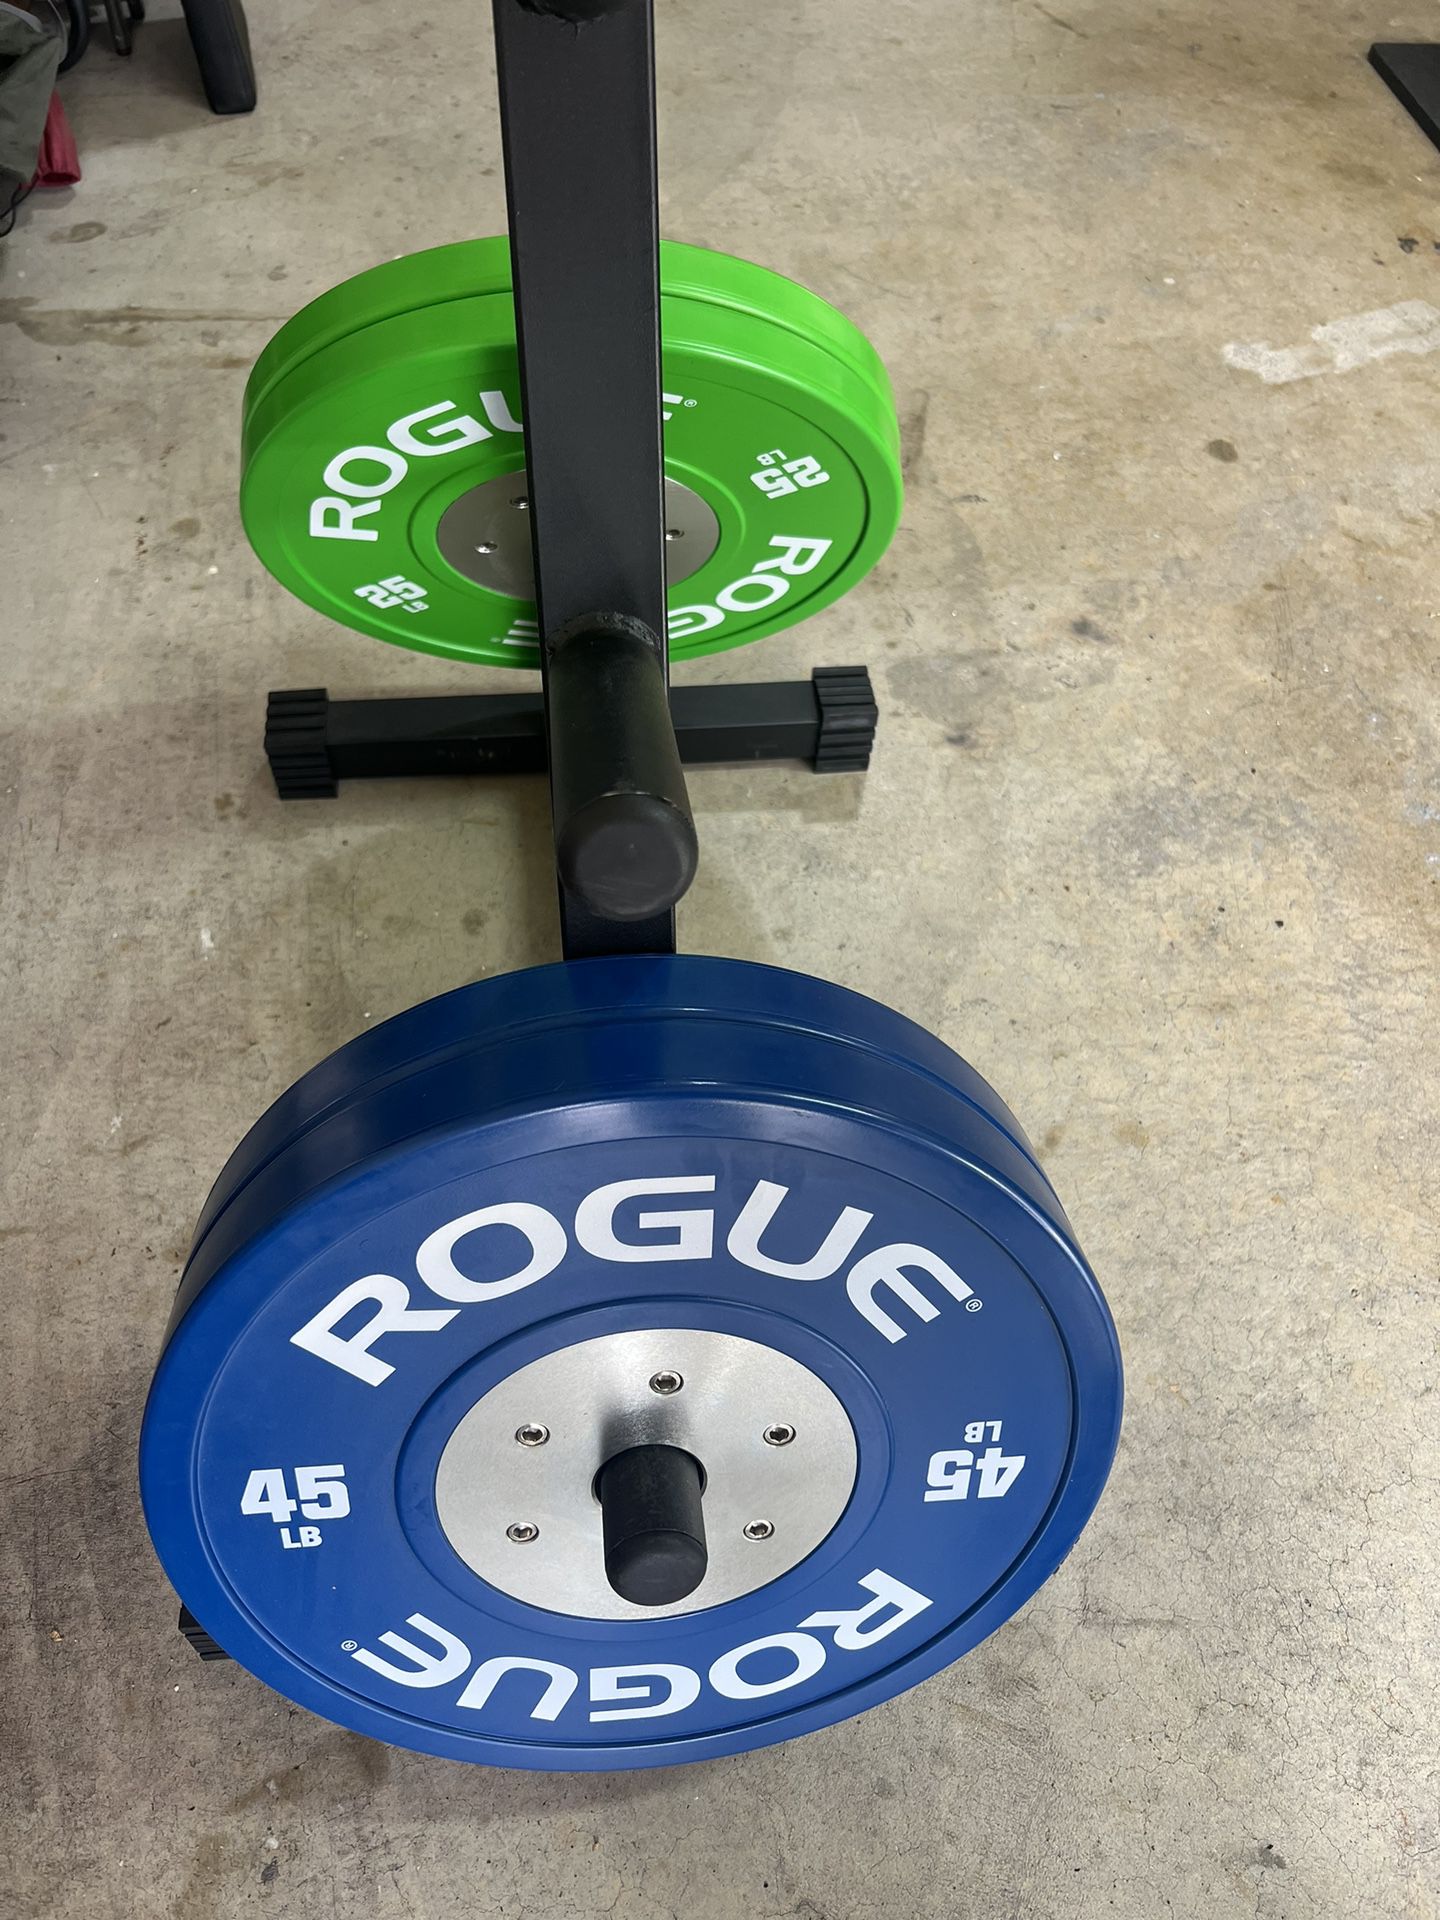 Rogue Color LB Training 2.0 Plates and York Tree